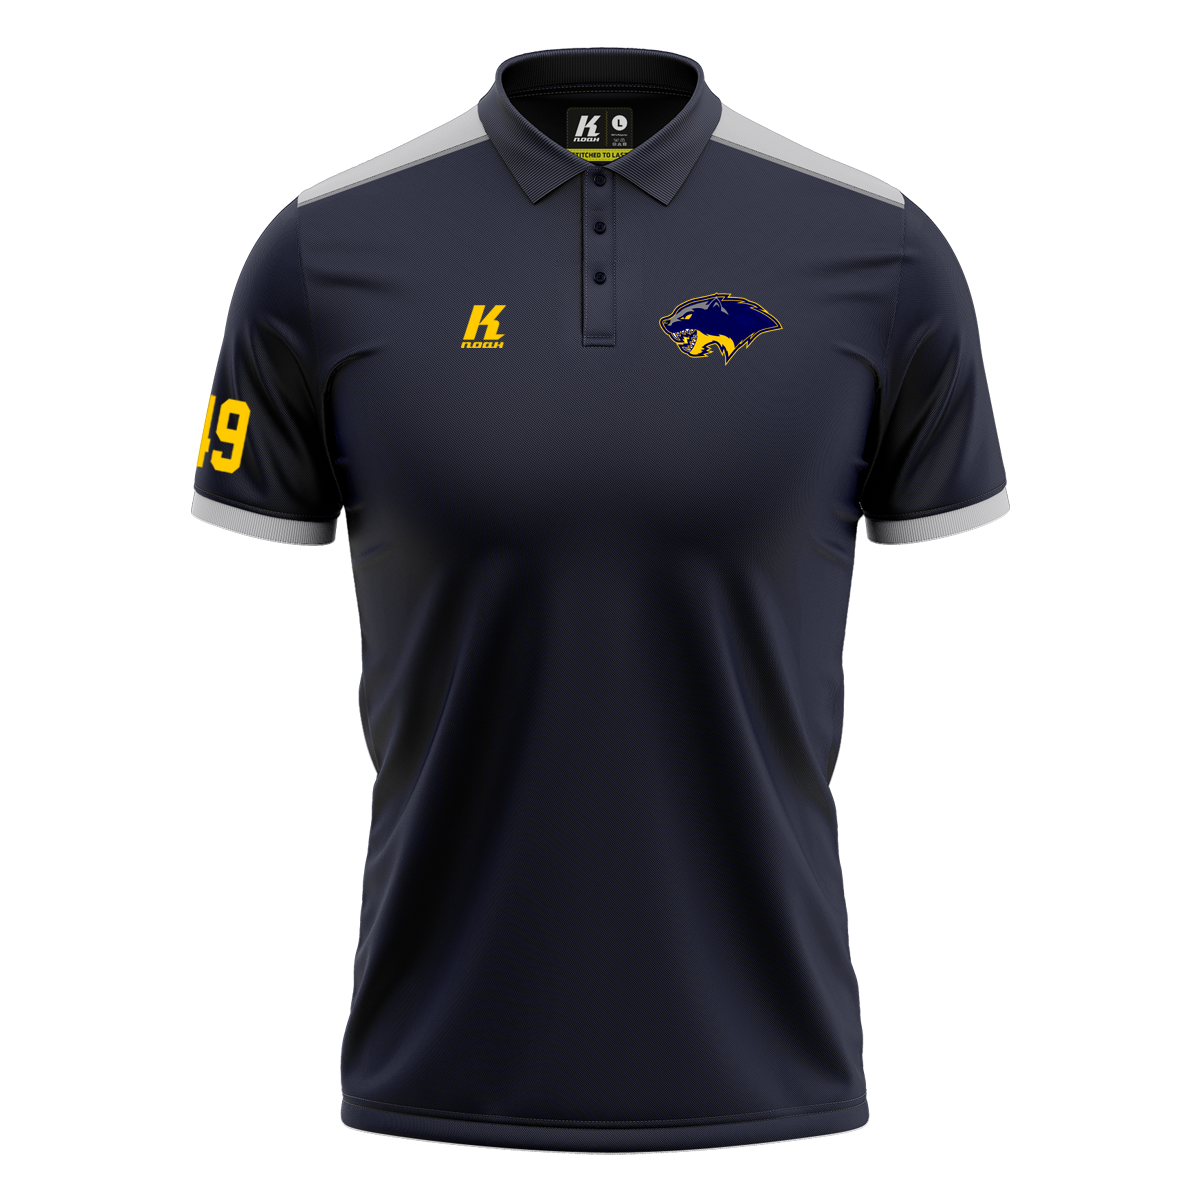 Wolverines K.Tech-Fiber Polo “Heritage” with Playernumber/Initials